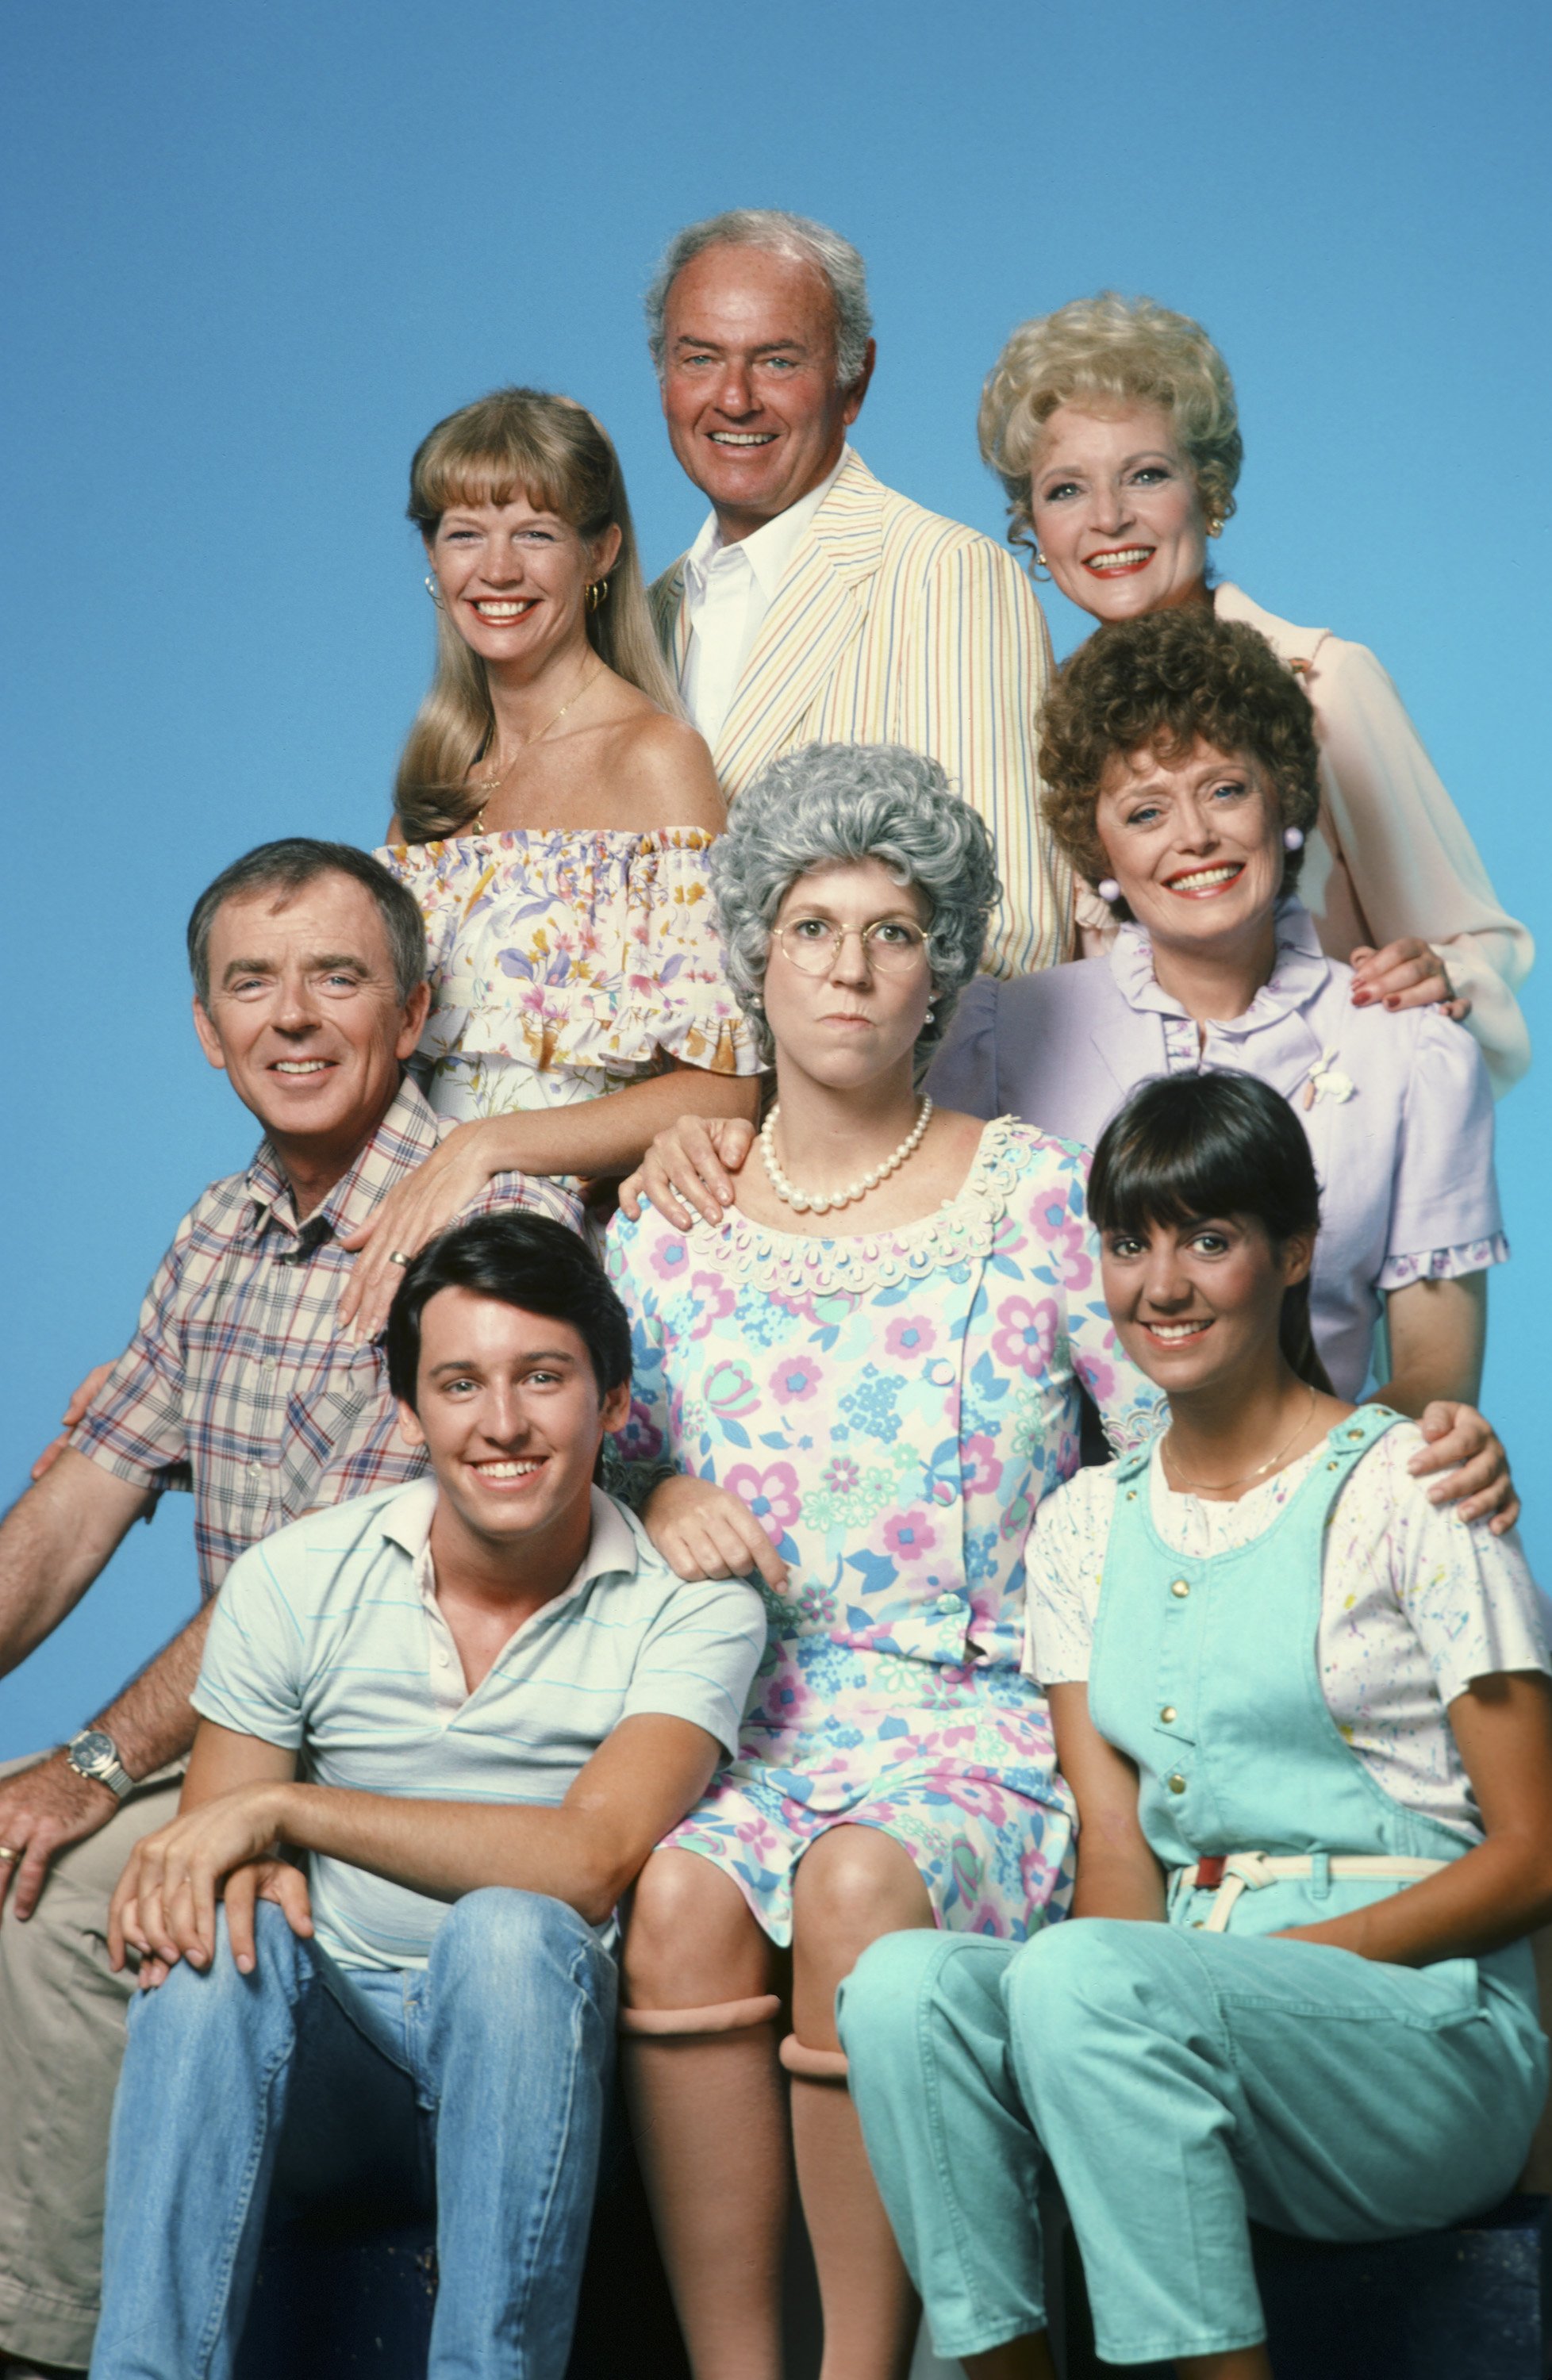 Top row, left to right: Dorothy Lyman, Harvey Korman, and Betty White. Middle row, left to right: Ken Berry, Vicki Lawrence, and Rue McClanahan. Front row, left to right: Eric Brown and Karin Argoud on "Mama's Family" | Source: Getty Images